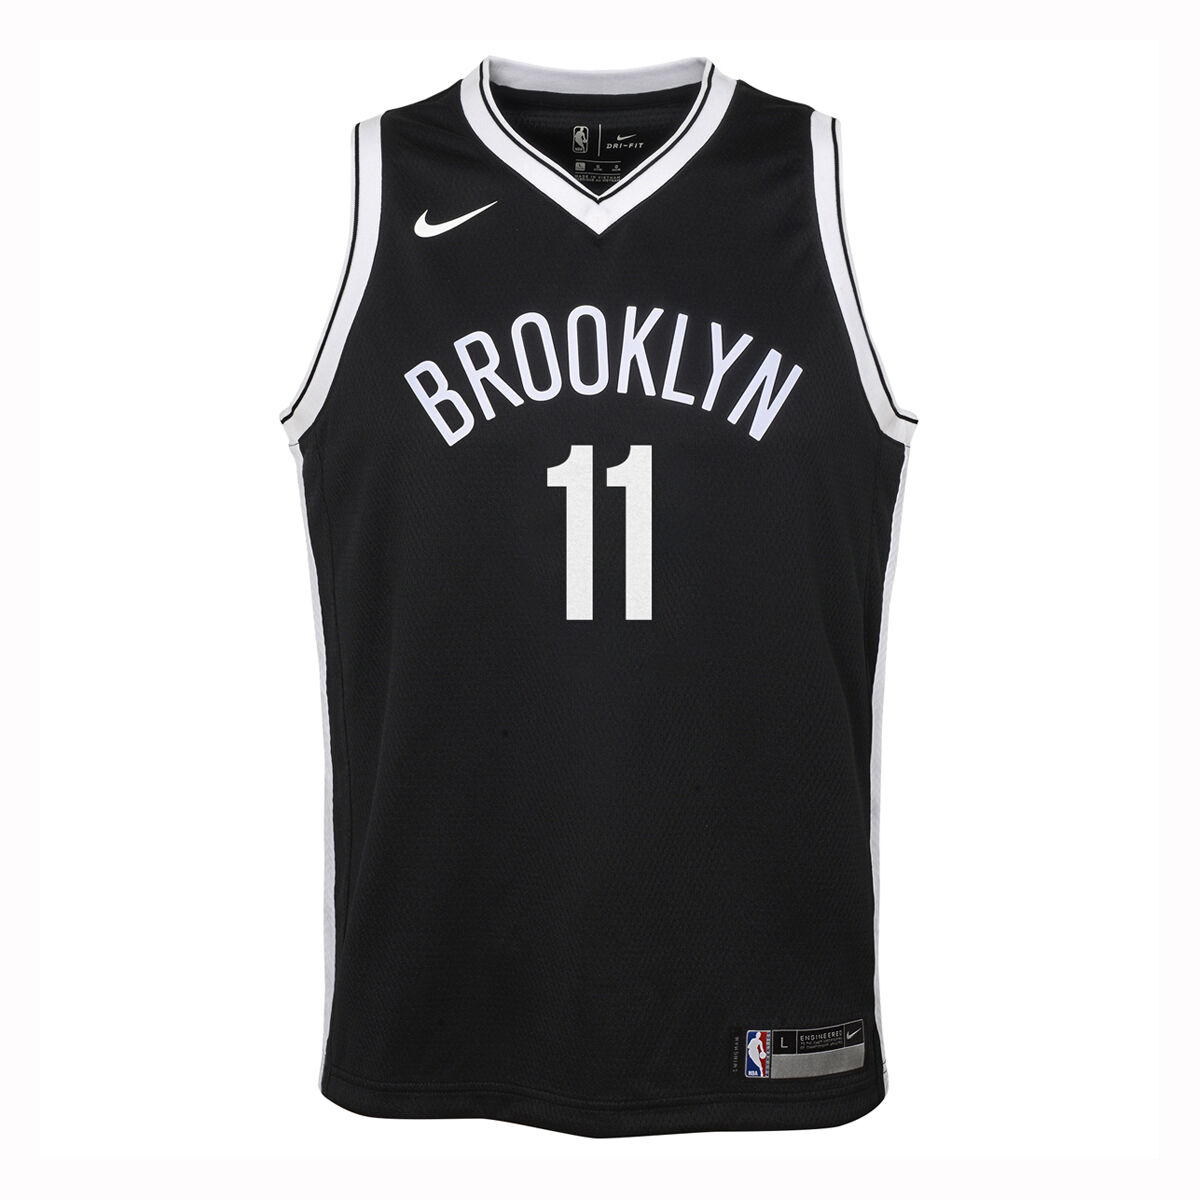 kyrie irving jersey white